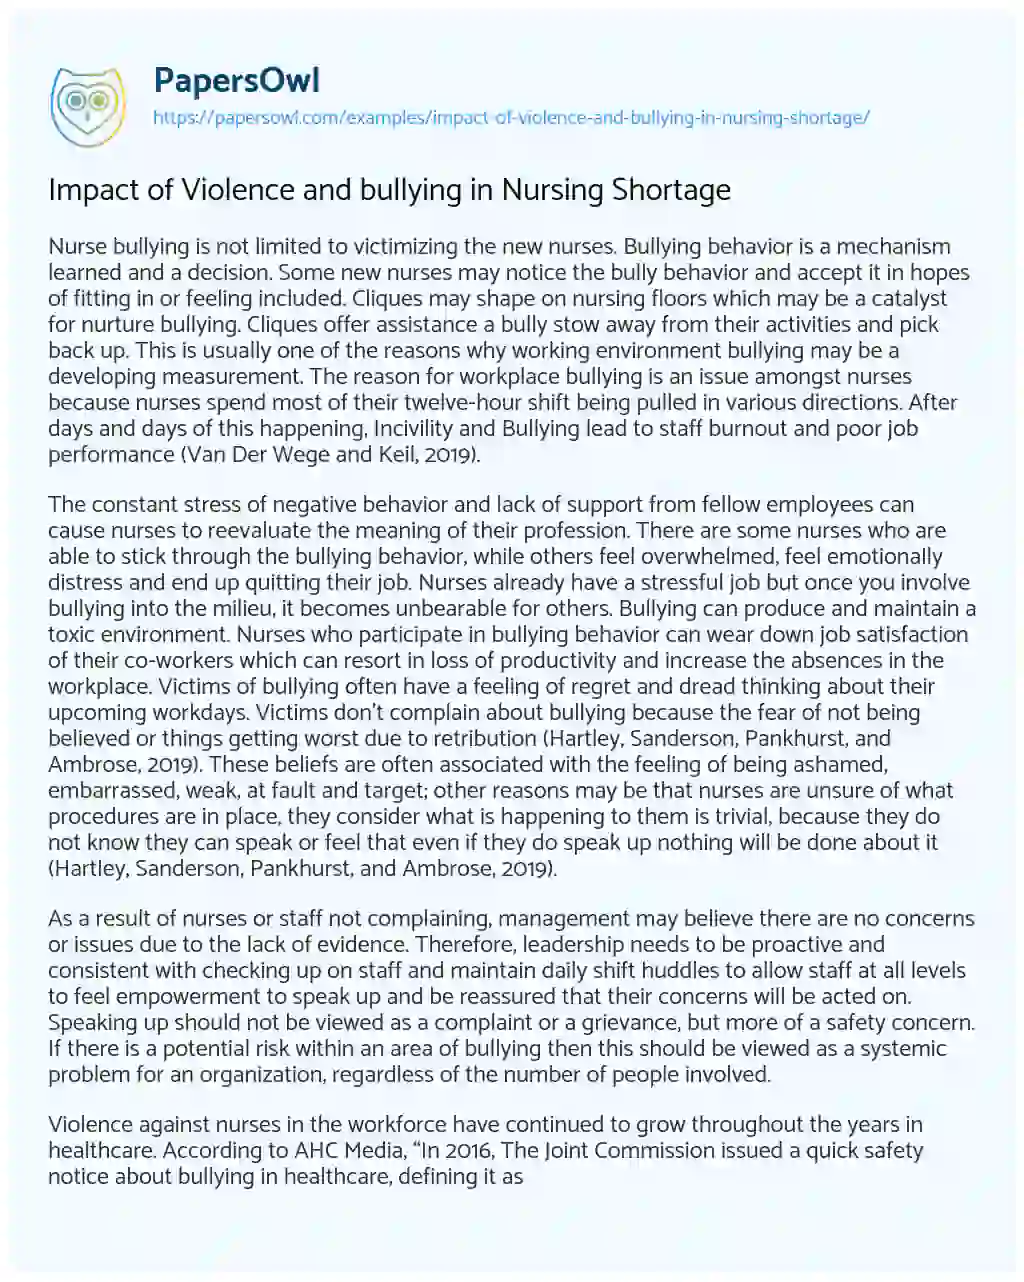 Essay on Impact of Violence and Bullying in Nursing Shortage